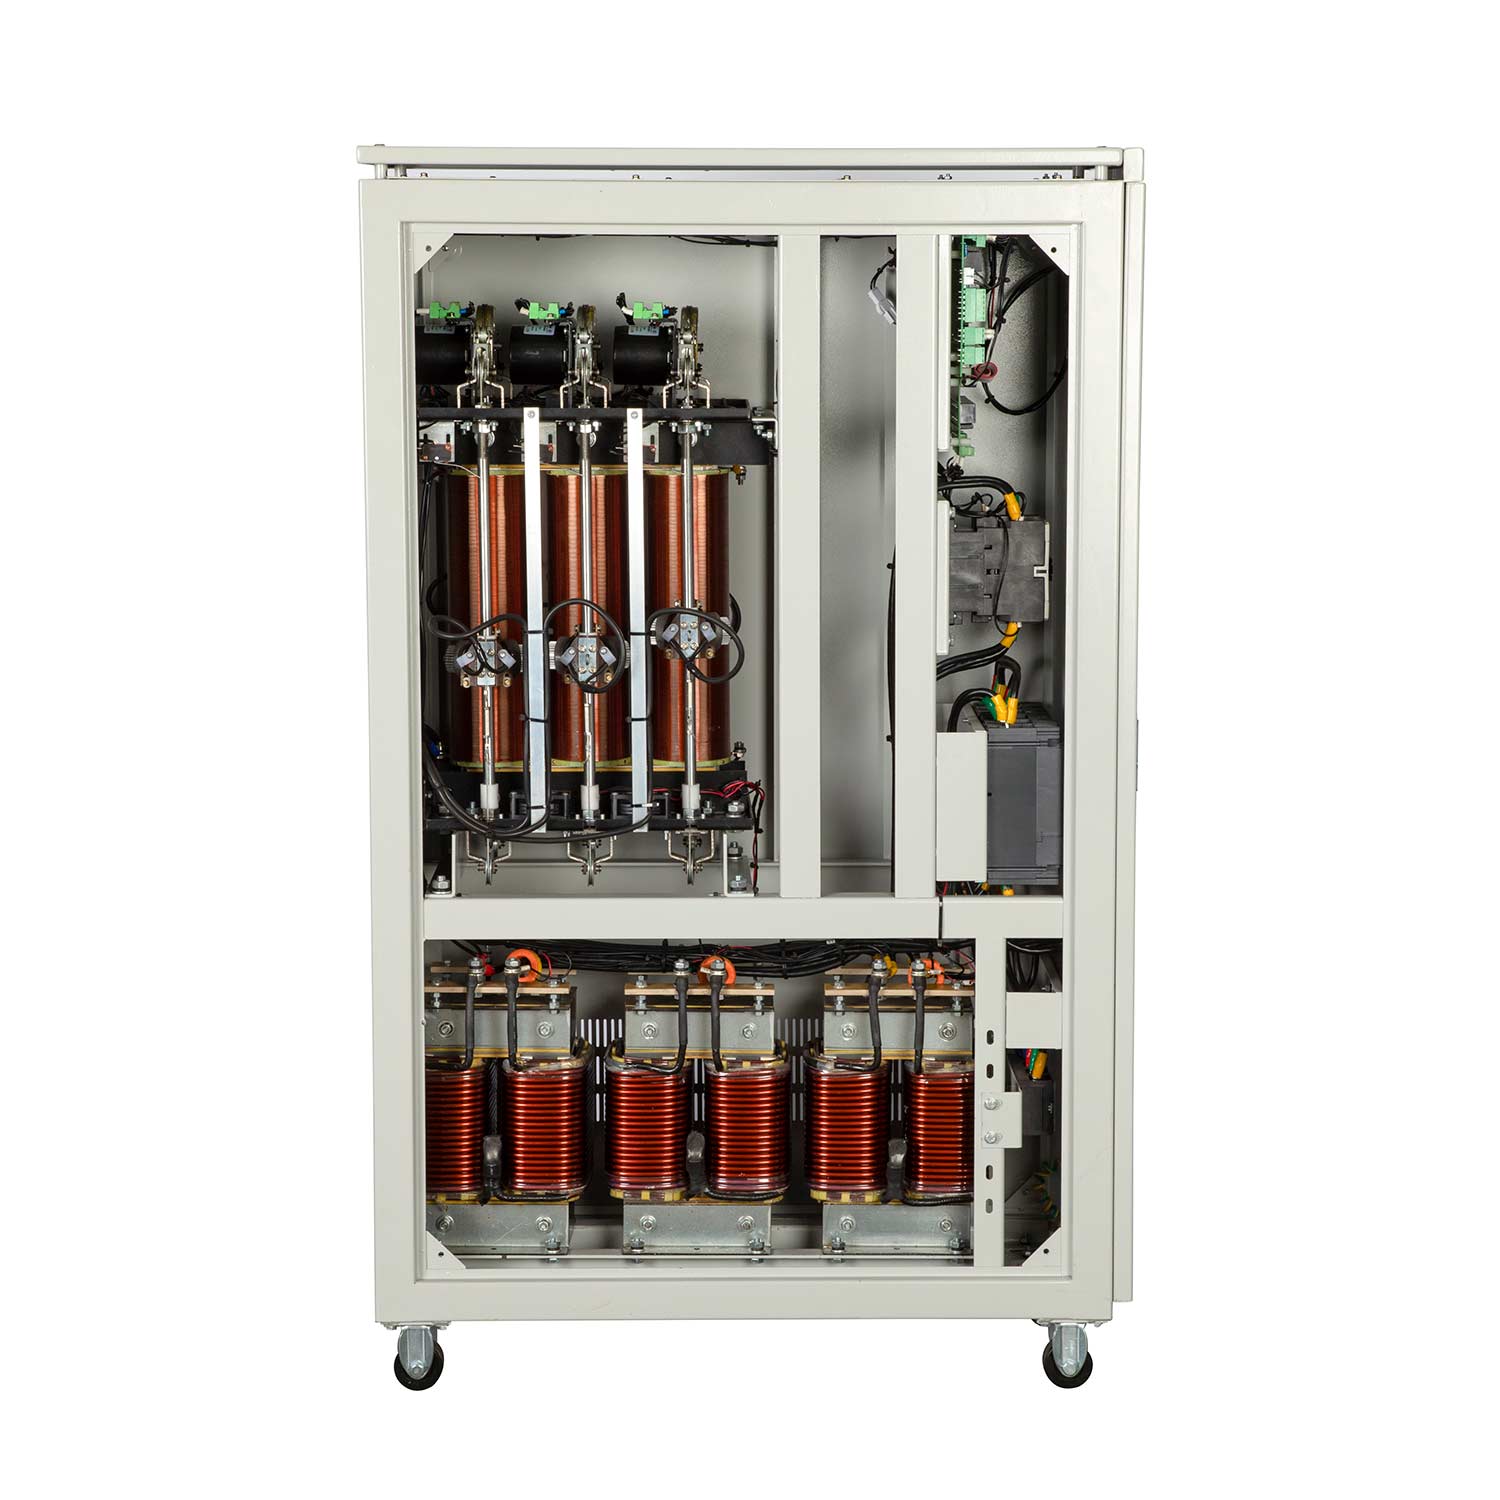 2500 kVA 3 Phase Automatic Voltage Stabilizer